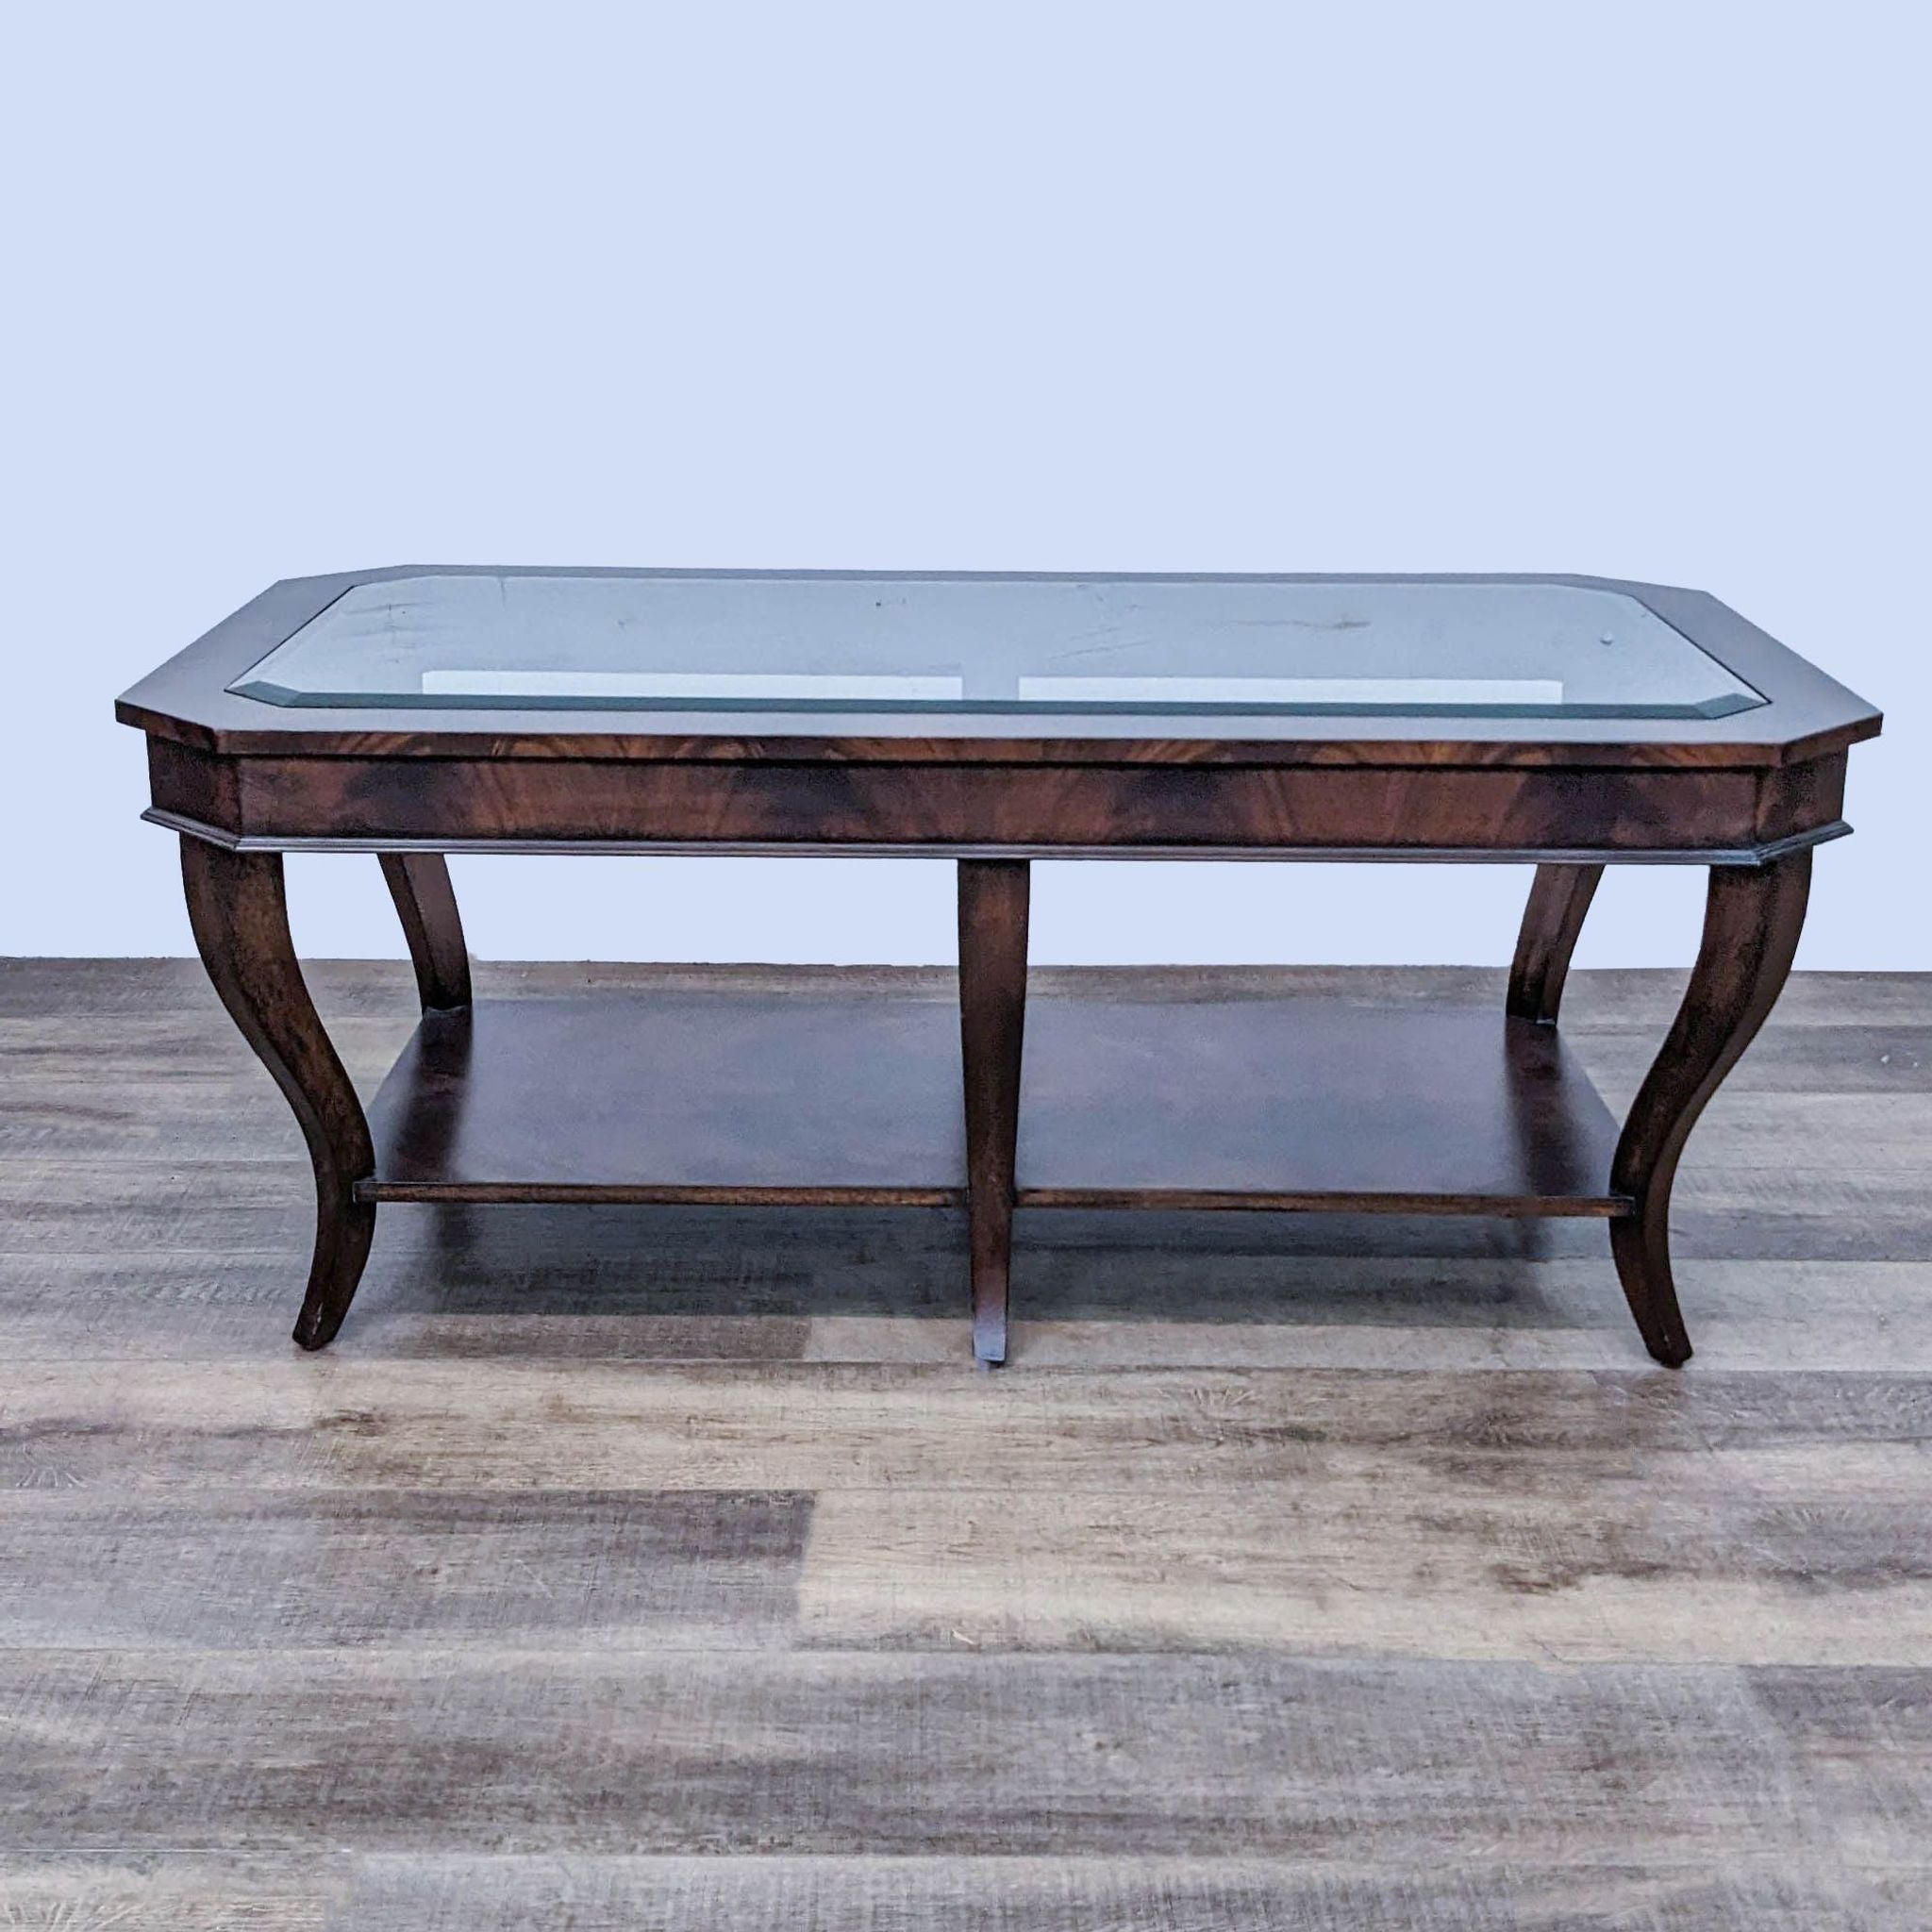 Ethan Allen mahogany coffee table with beveled glass top and curved cabriole legs on a wooden floor.